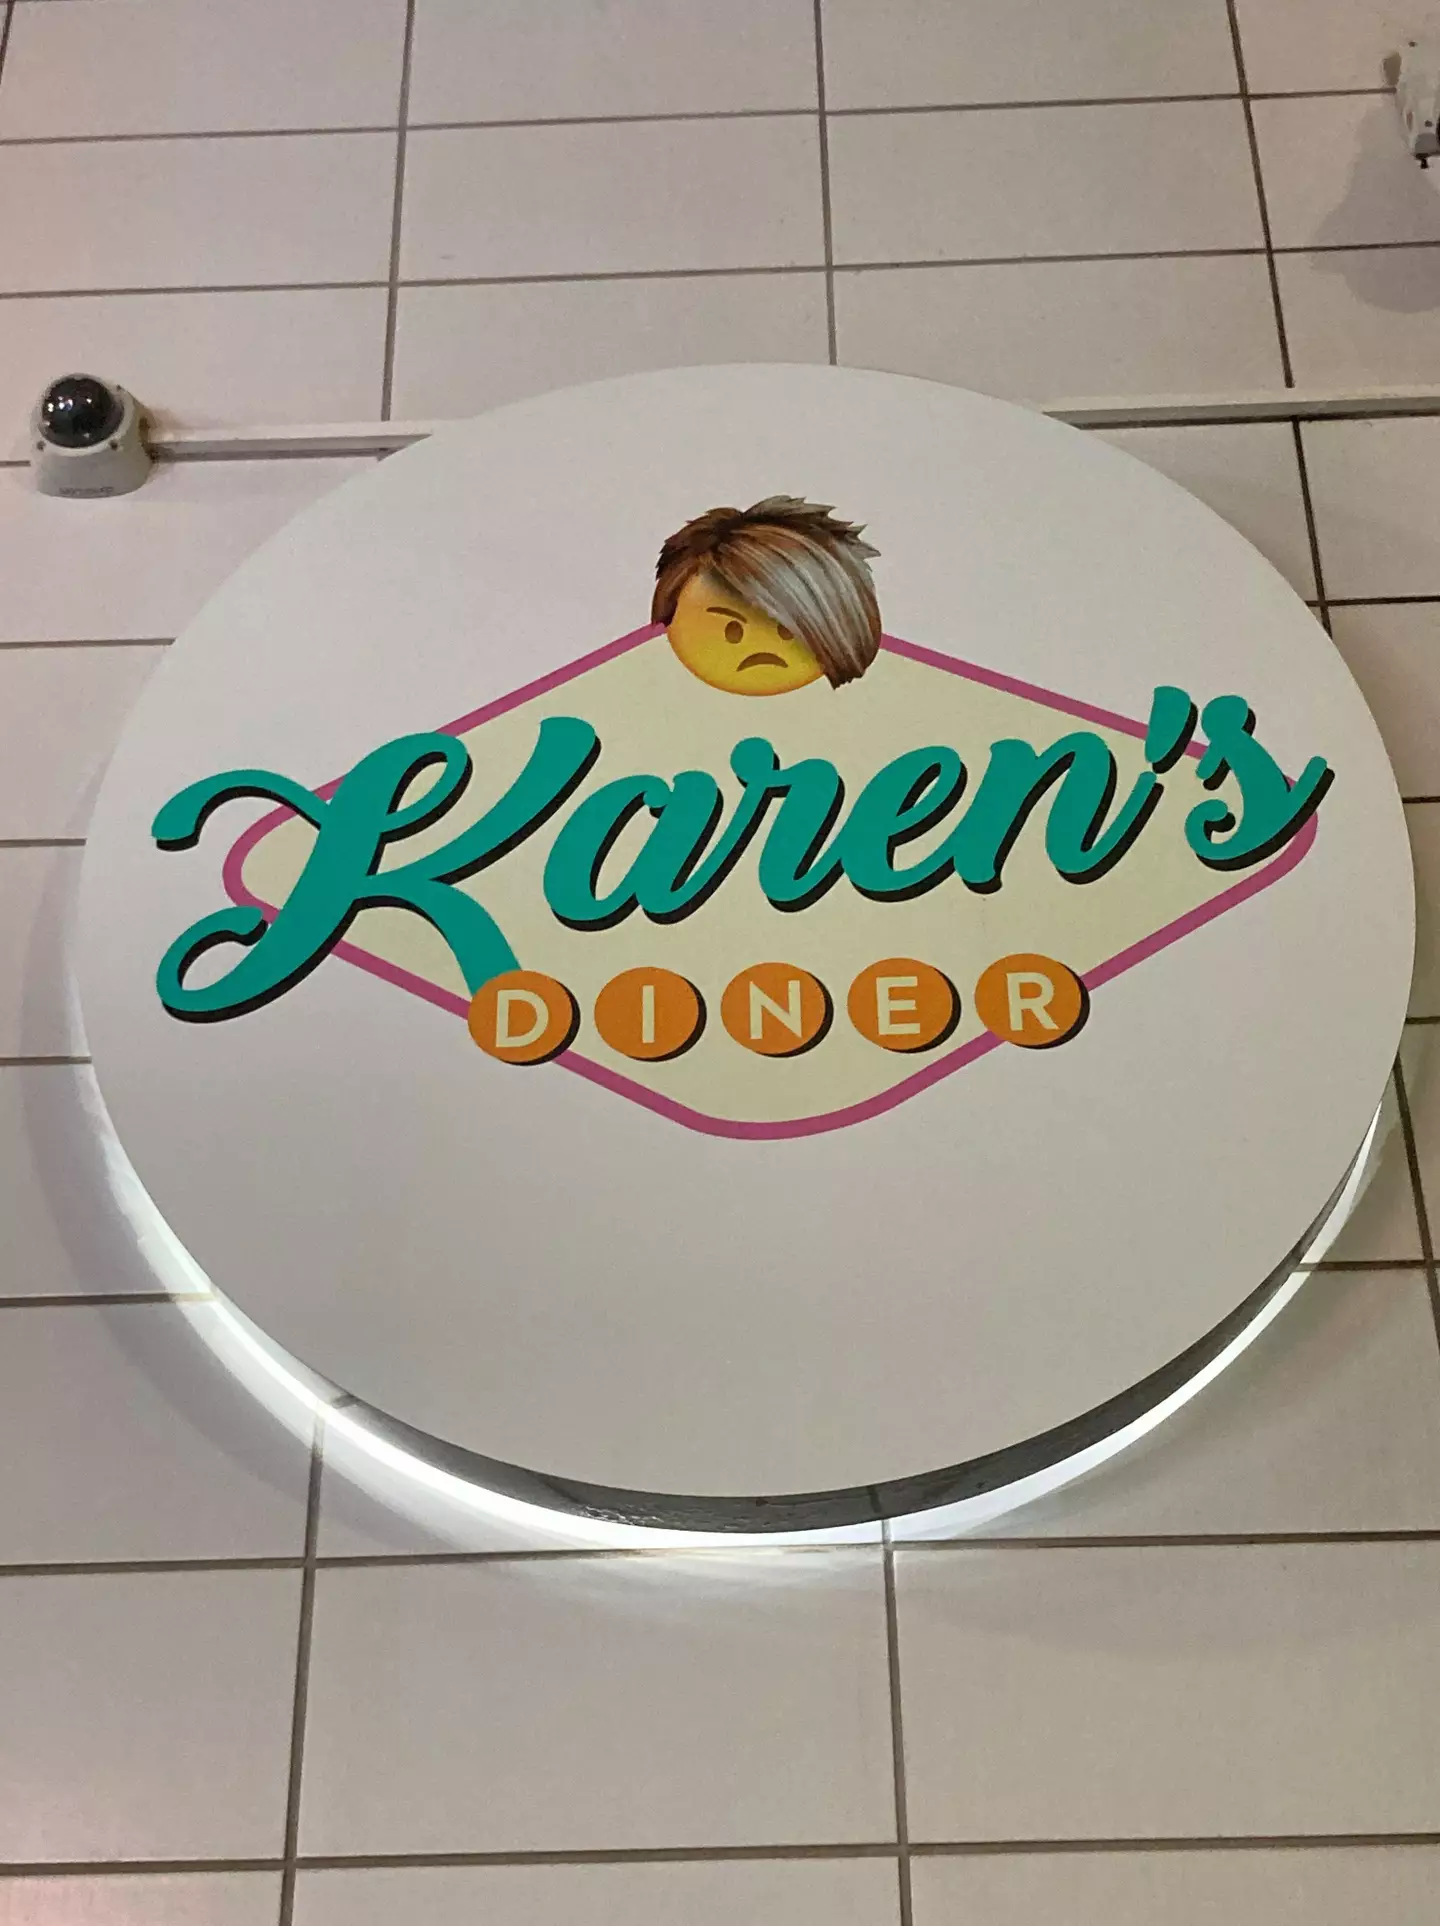 Karen's Diner reminds customers it's still a 'functioning restaurant' and so OHS rules apply.